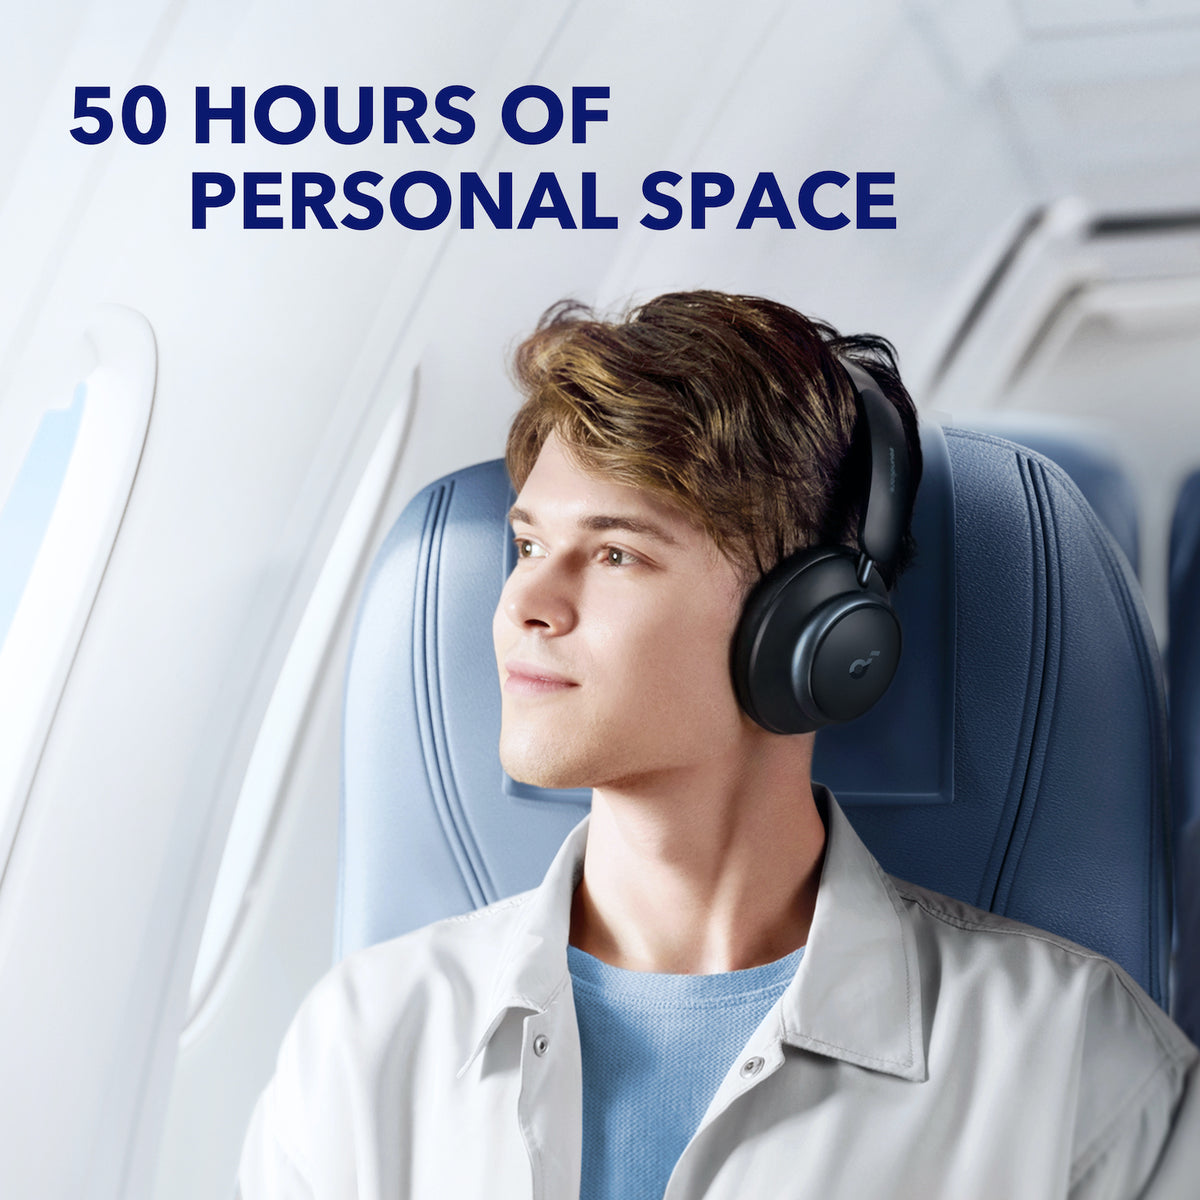 Buy Space Q45 All-New Noise Cancelling Headphones - soundcore CA